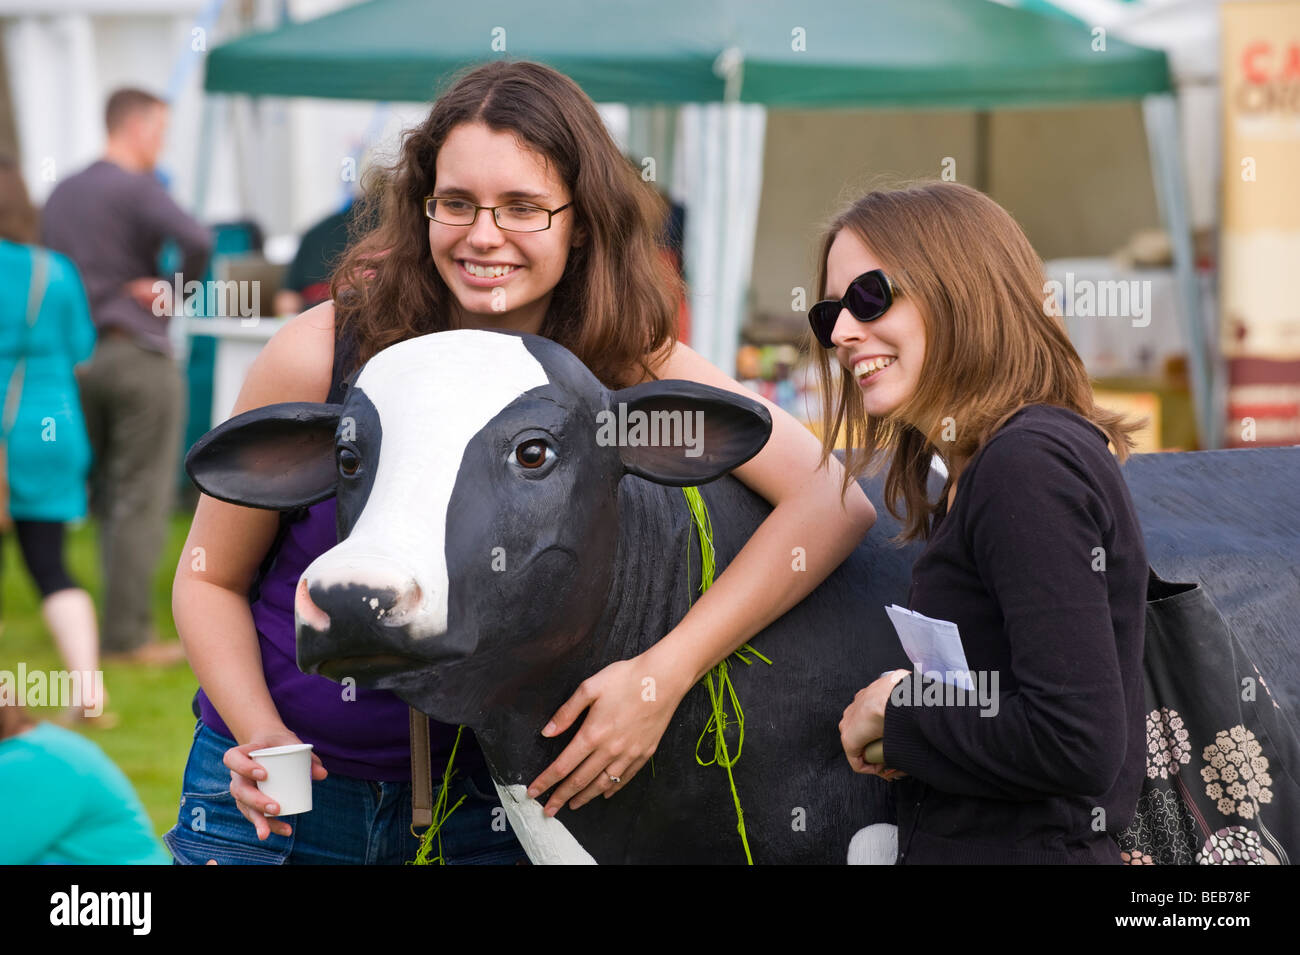 Two young women have their photo taken with promotional plastic cow at The Great British Cheese Festival Cardiff South Wales UK Stock Photo